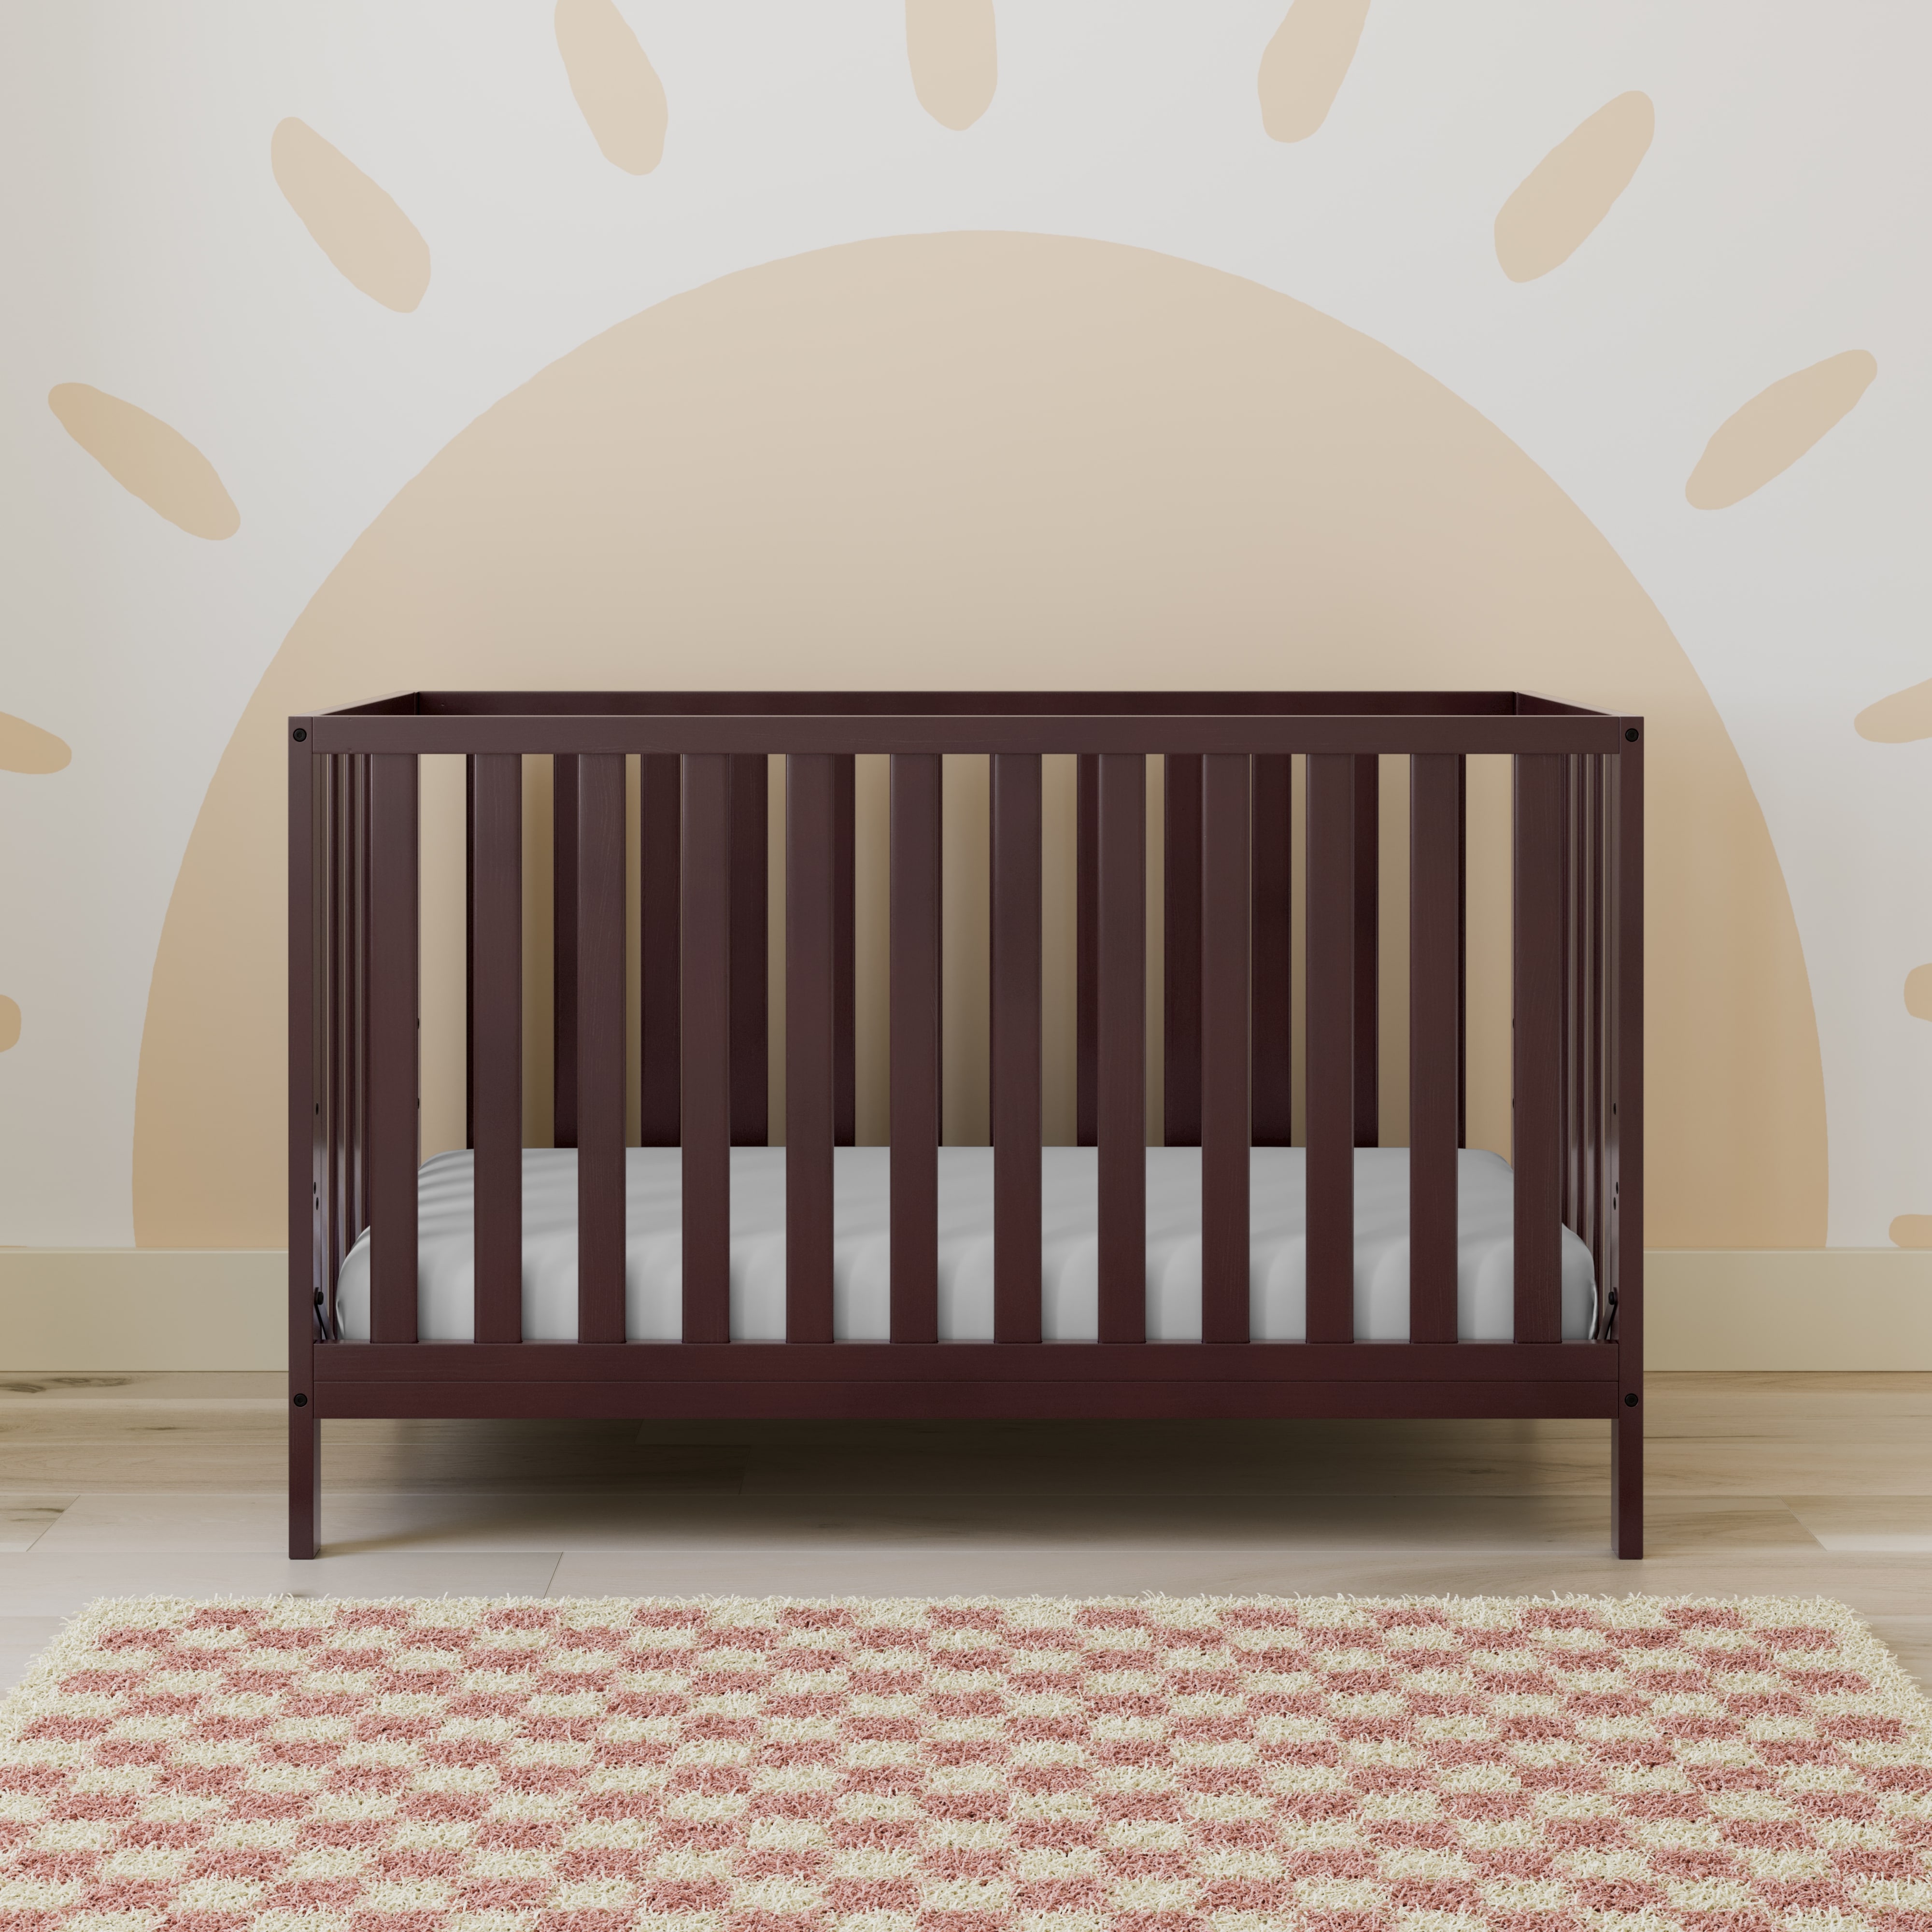 Storkcraft Sunset 4-in-1 Convertible Baby Crib, Espresso - image 3 of 8